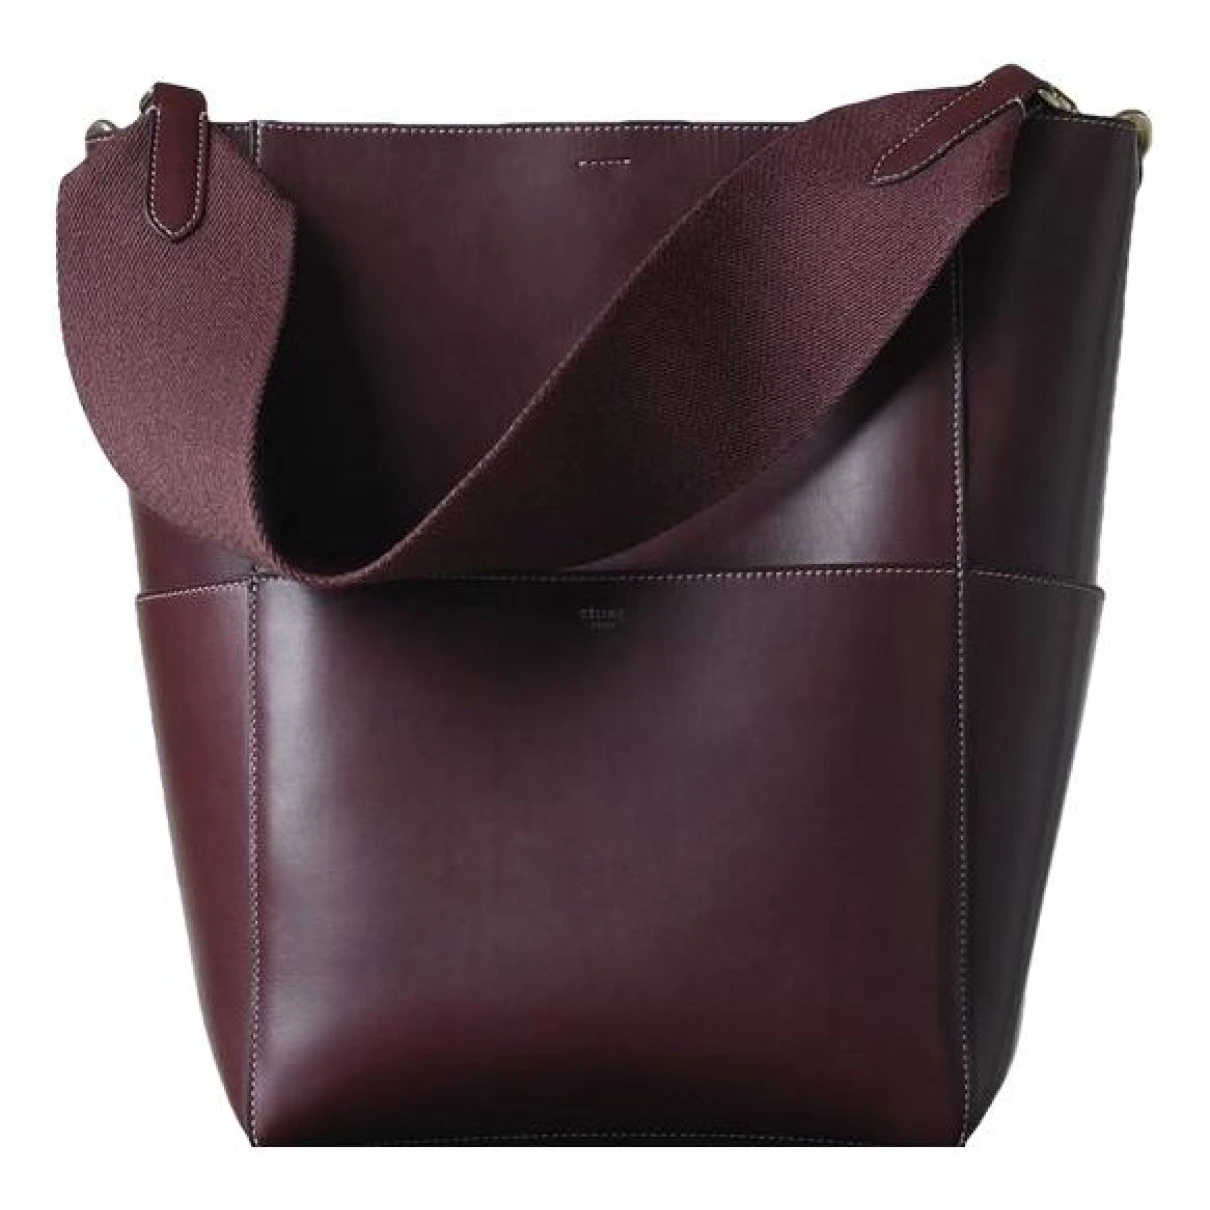 Pre-owned Celine Seau Sangle Leather Tote In Burgundy